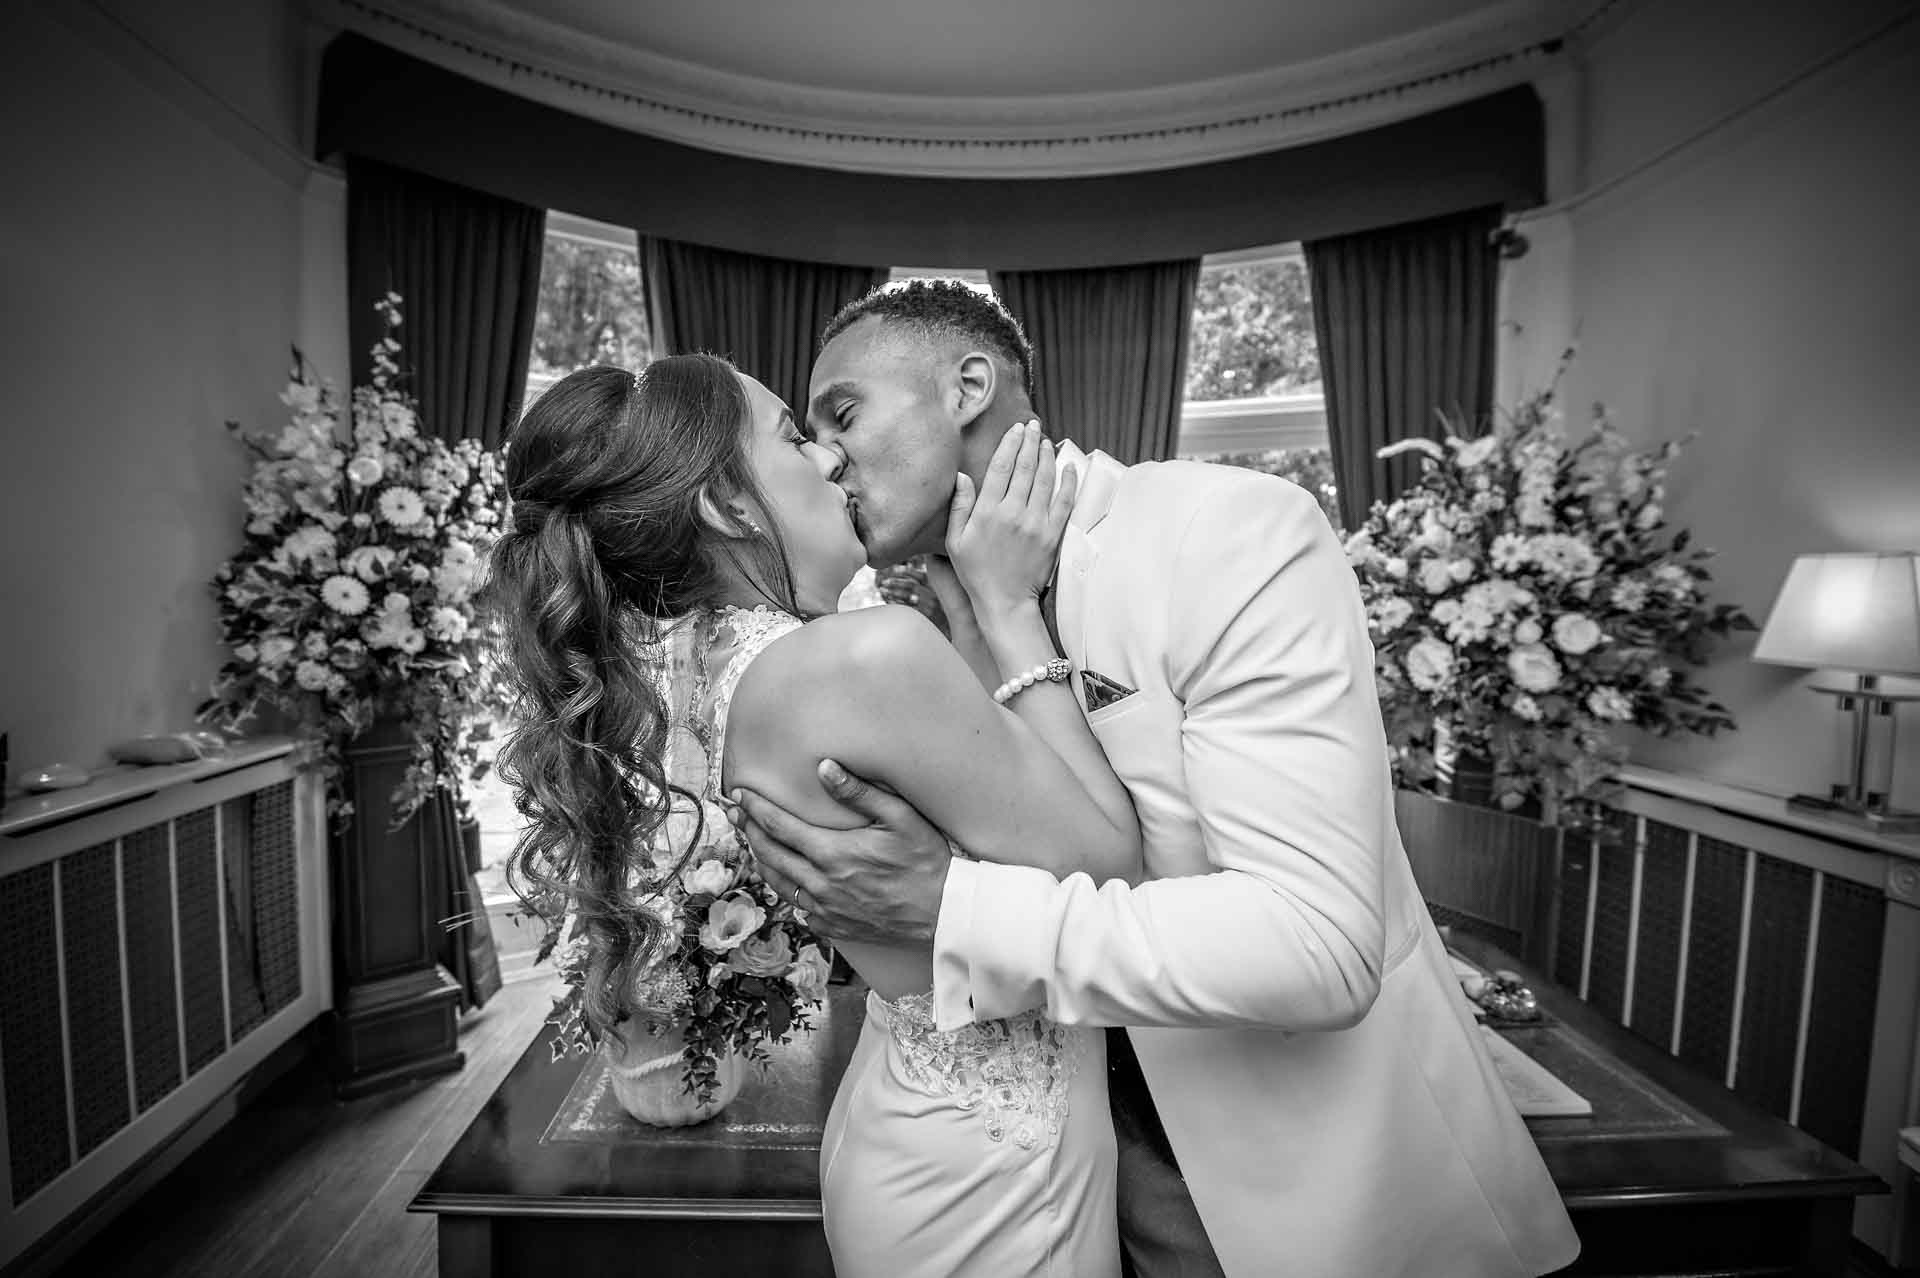 Newly-weds share their first kiss in Southwark Register Office for their wedding